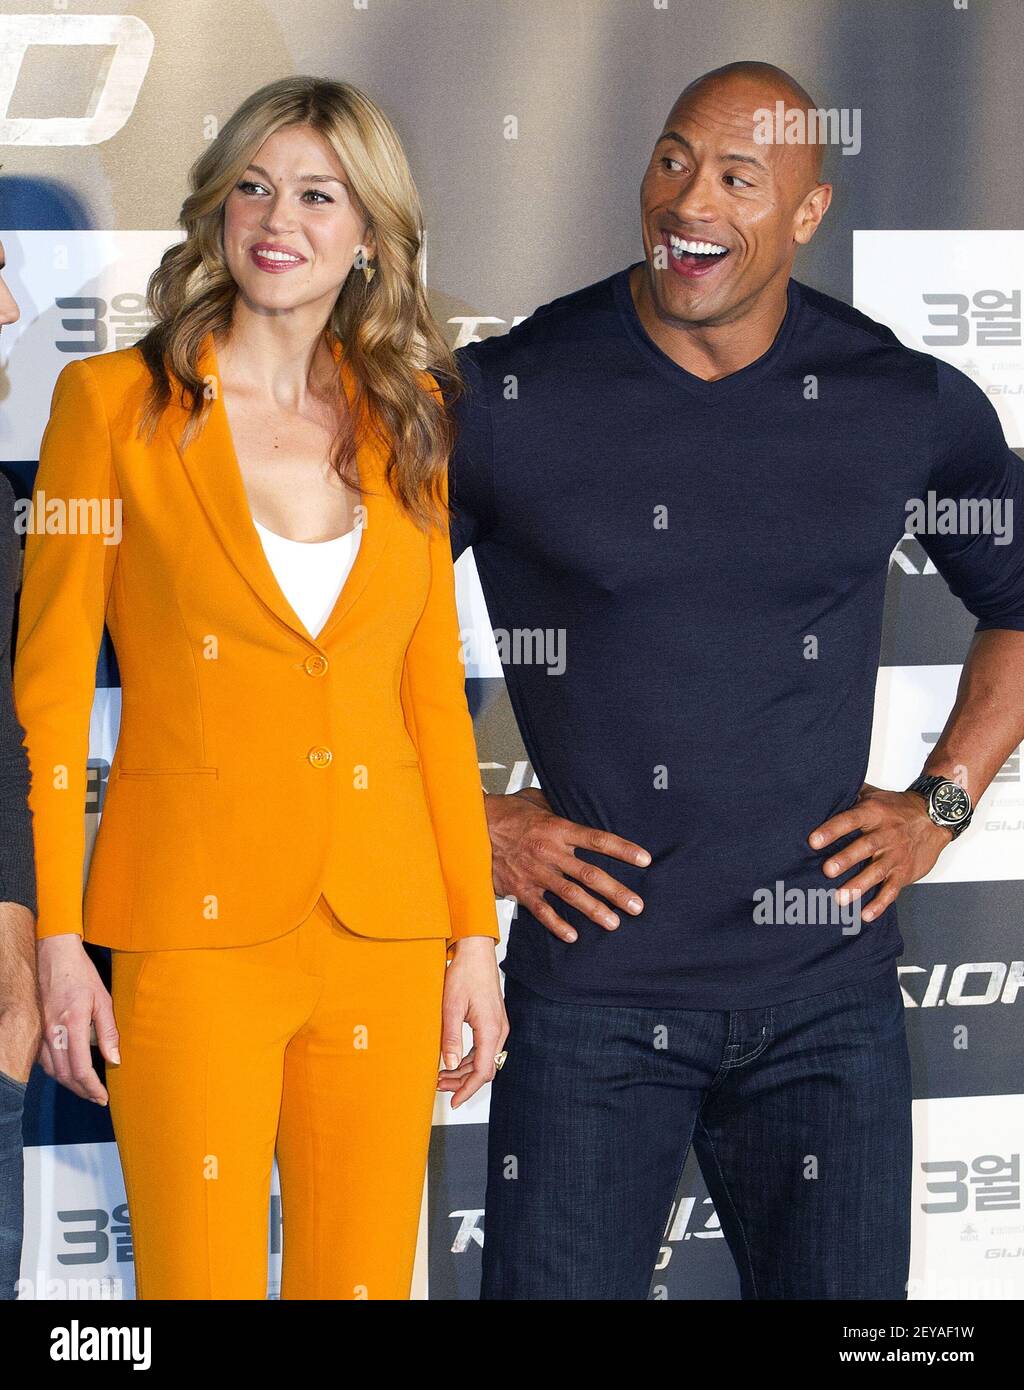 (L to R) Actress Adrianne Palicki and actor Dwayne Johnson attend a press conference for the movie 'G. I. Joe:Retaliation' World premier at hotel in Seoul, South Korea on March 11, 2013. The movie is to be released in South Korea on March 28. Photo Credit: Lee Young-ho/Sipa USA Stock Photo